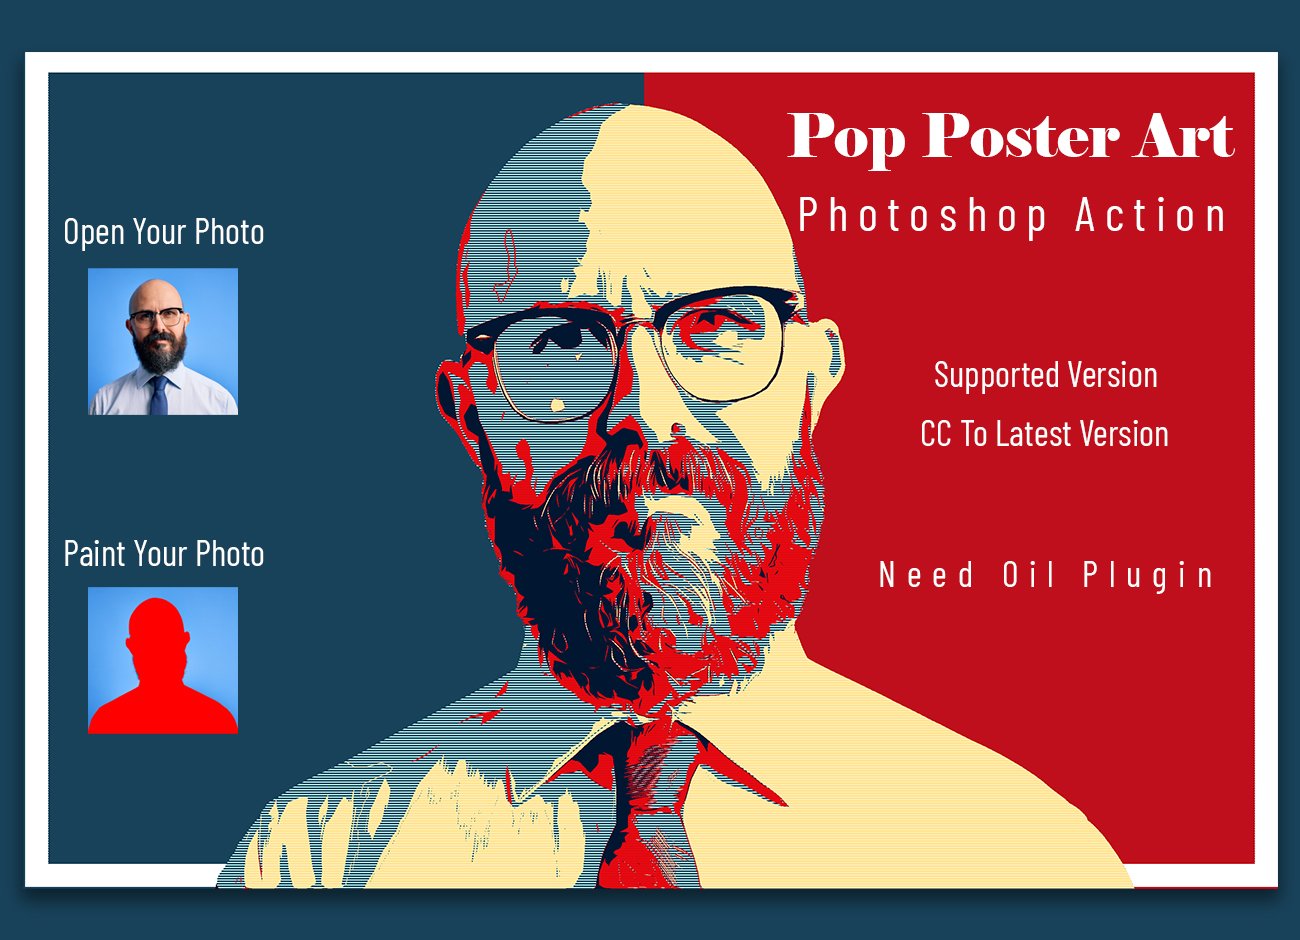 Pop Poster Art Photoshop Actioncover image.